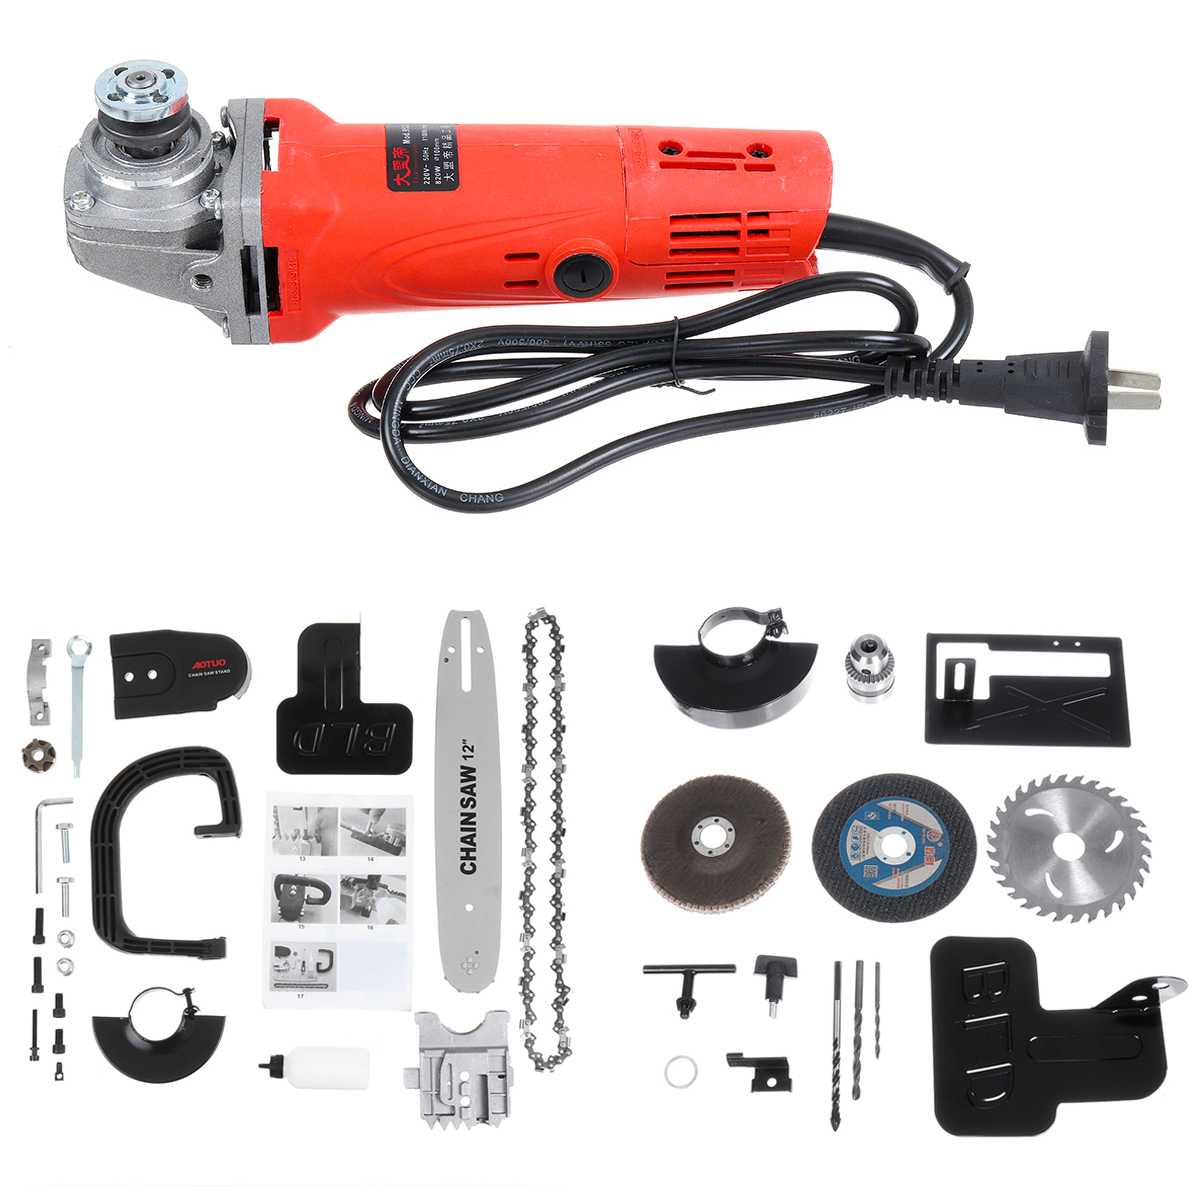 

220V 1000W 10000RPM Electric Angle Grinder with 12 inch Chain Saw Chainsaw Bracket Set